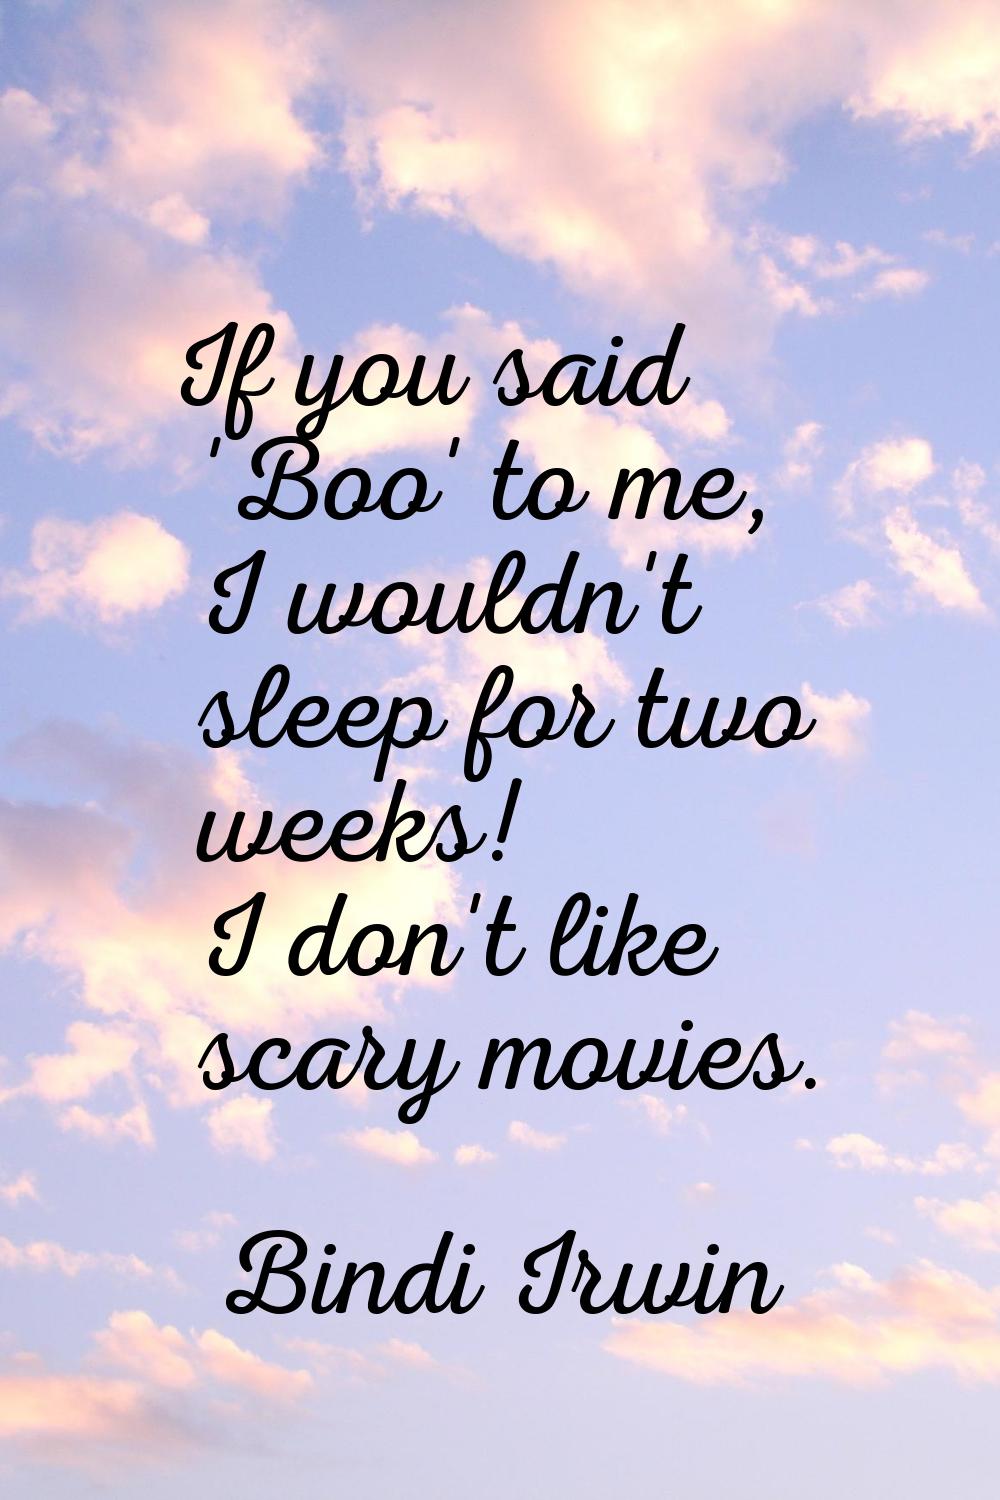 If you said 'Boo' to me, I wouldn't sleep for two weeks! I don't like scary movies.